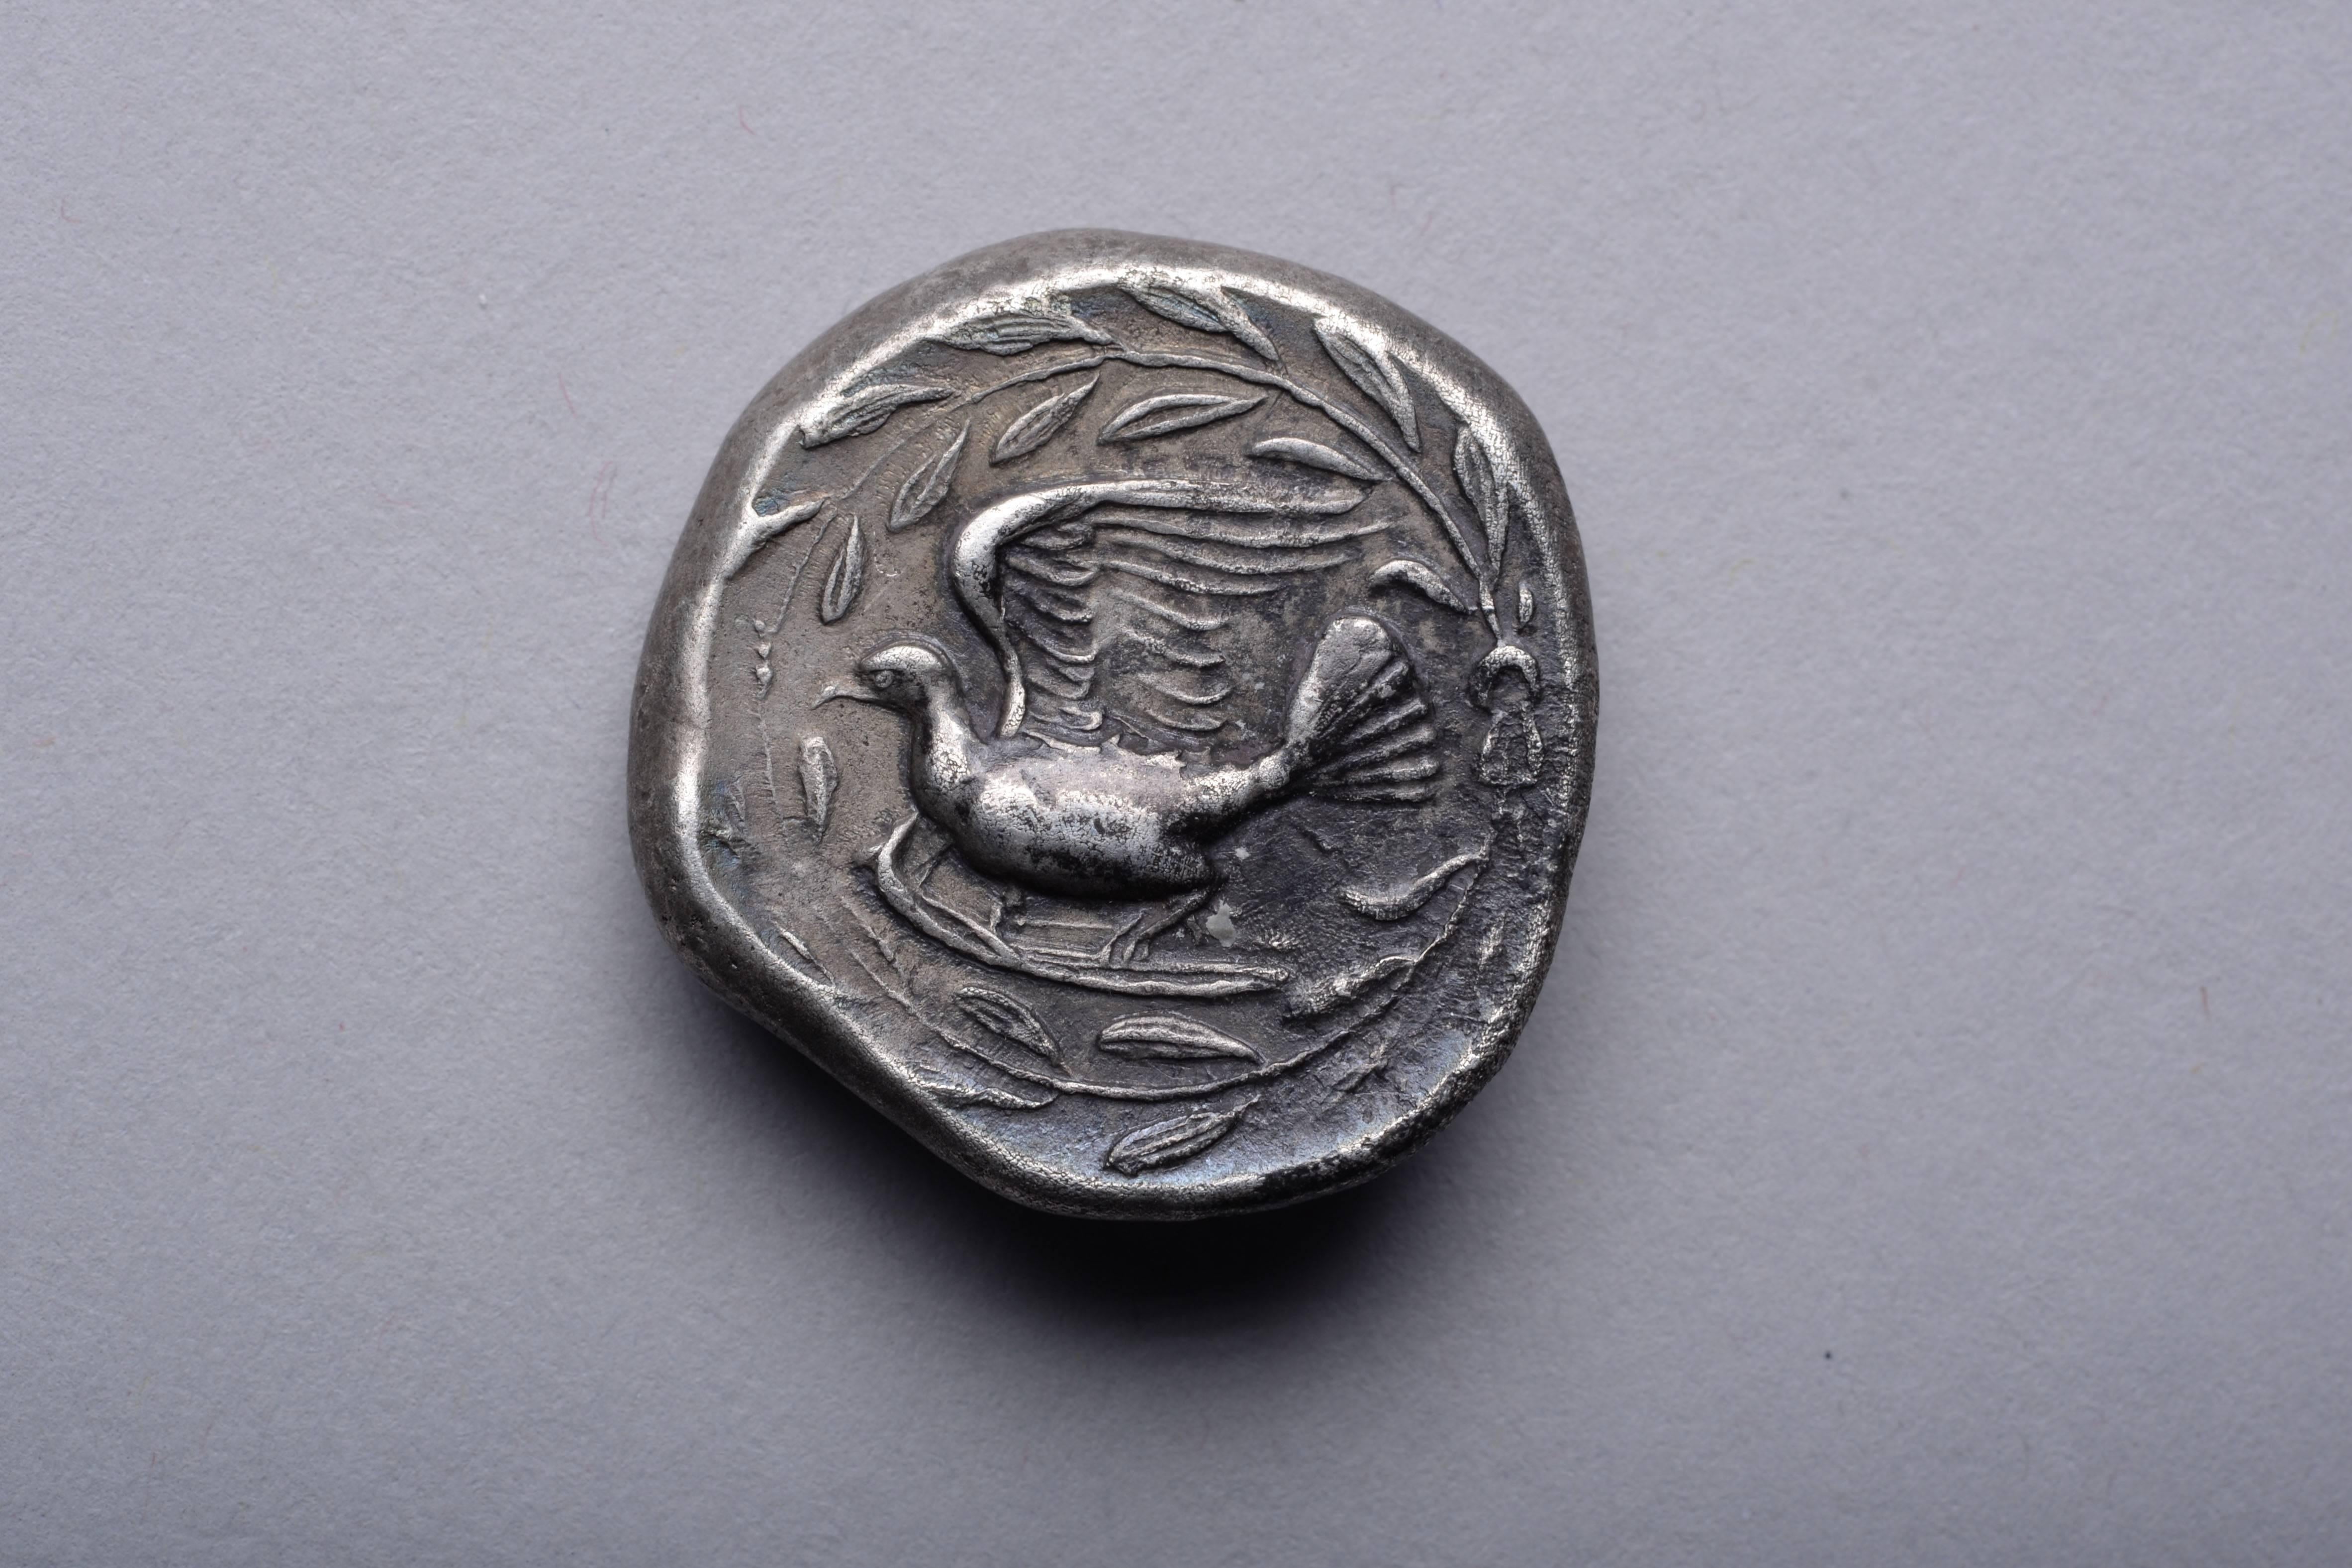 A superb example of one of the most graceful and artistic coin types of antiquity, struck from the most artistically accomplished obverse die that we have seen. An ancient silver stater from the city of Sicyon, in the northern Peloponnese, struck